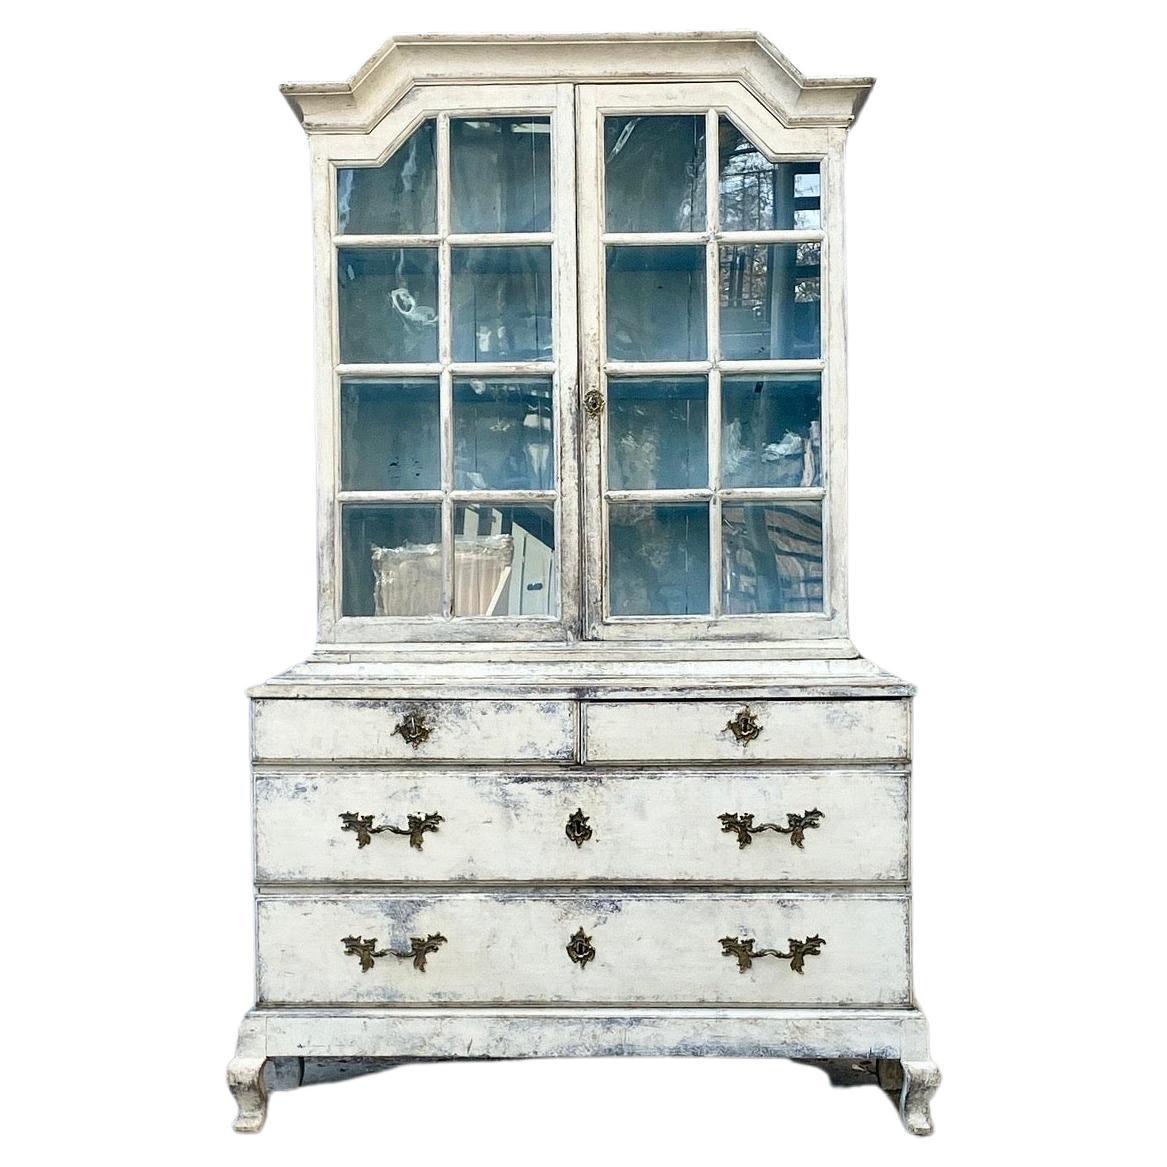 Antique Swedish Glass-Top Cabinet Made in Two-parts.
The base has a set of 4 drawers and the top display cabinet has two glass doors that is patinated in a traditional Gustavian grey and completed with bronze hardware (including a key). The doors to